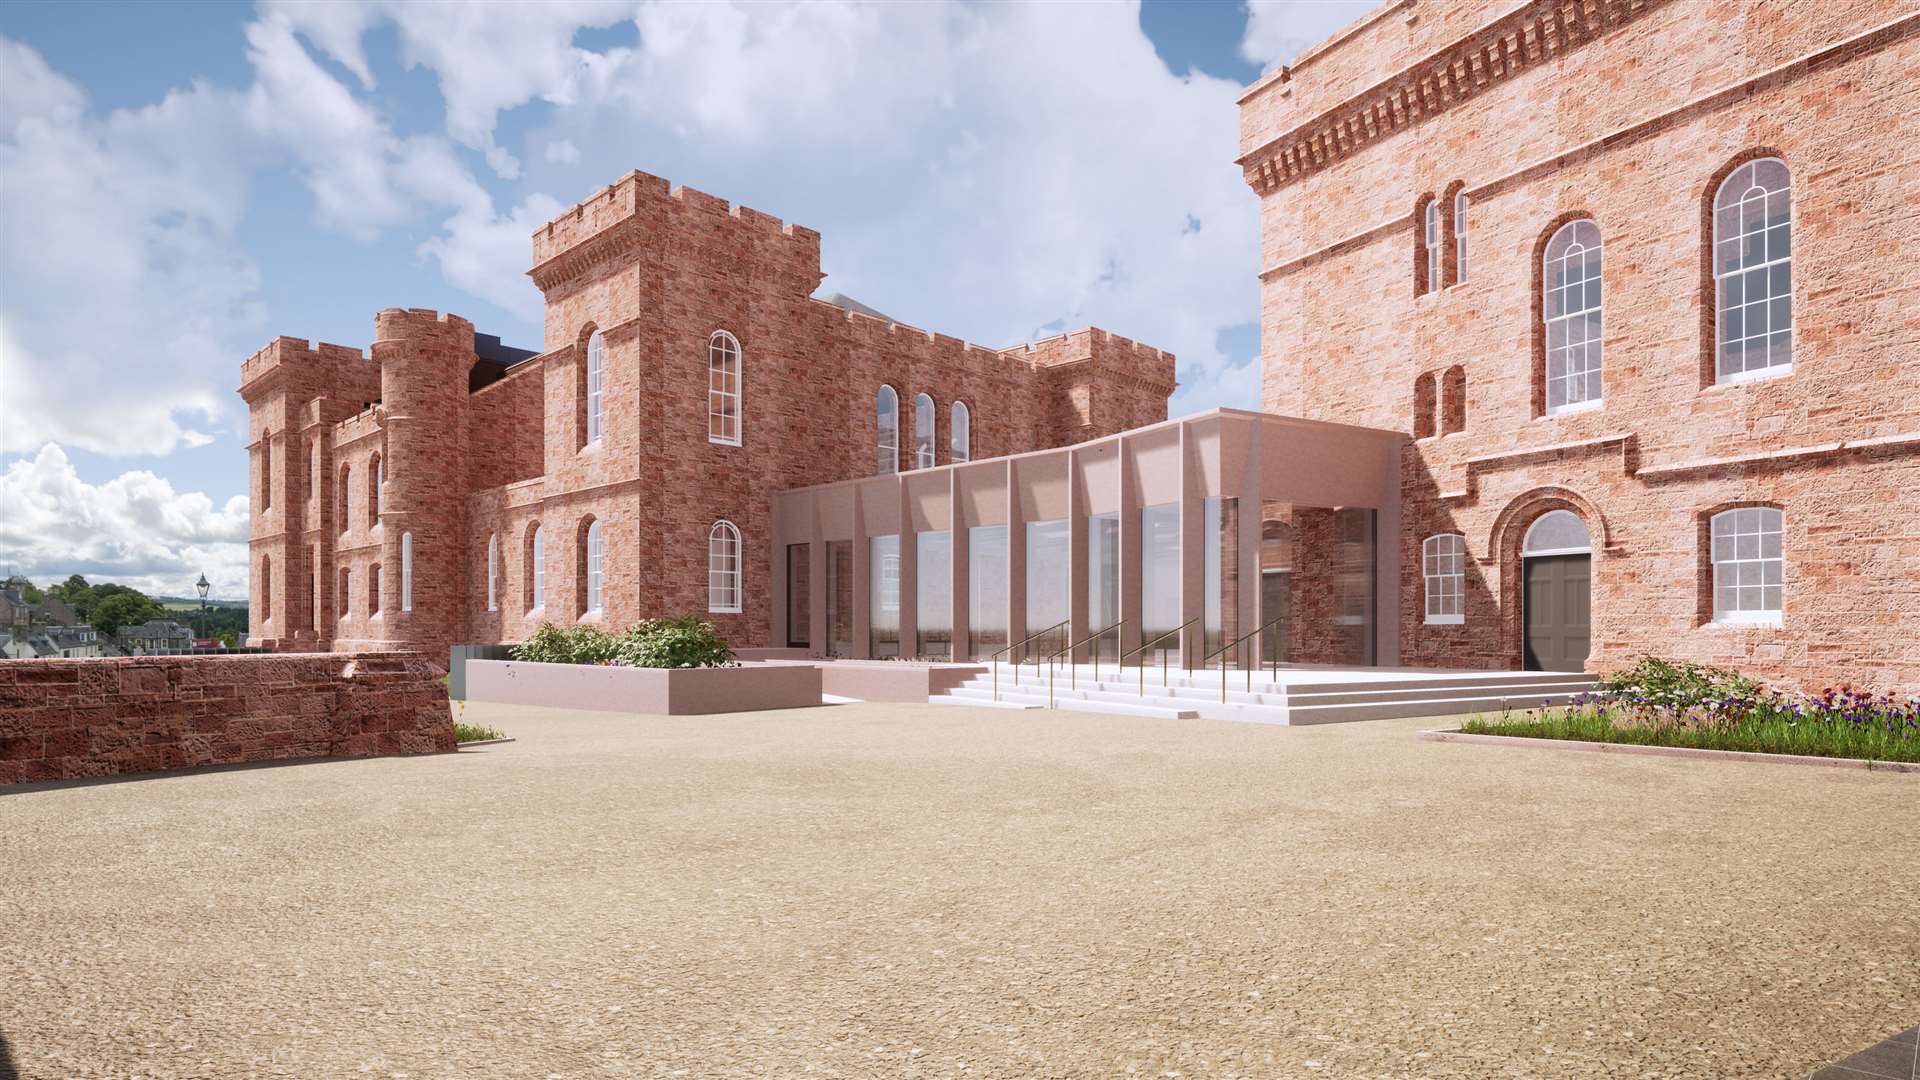 An artist's impression of how Inverness Castle will look.